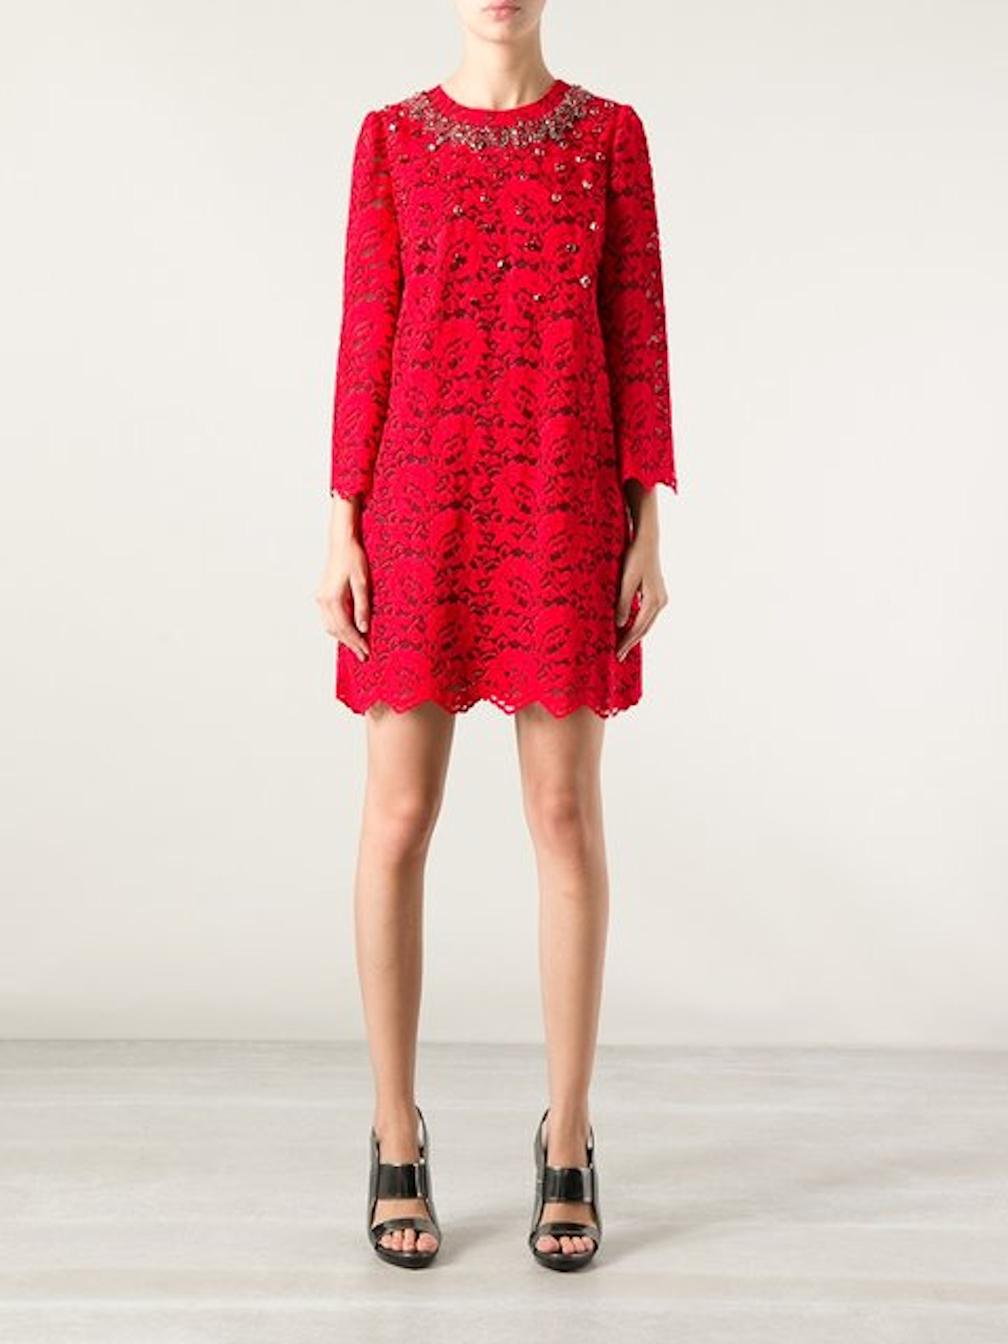 NEW Dolce & Gabbana Crystal Embellished Red Lace & Silk Dress 38 For Sale 6